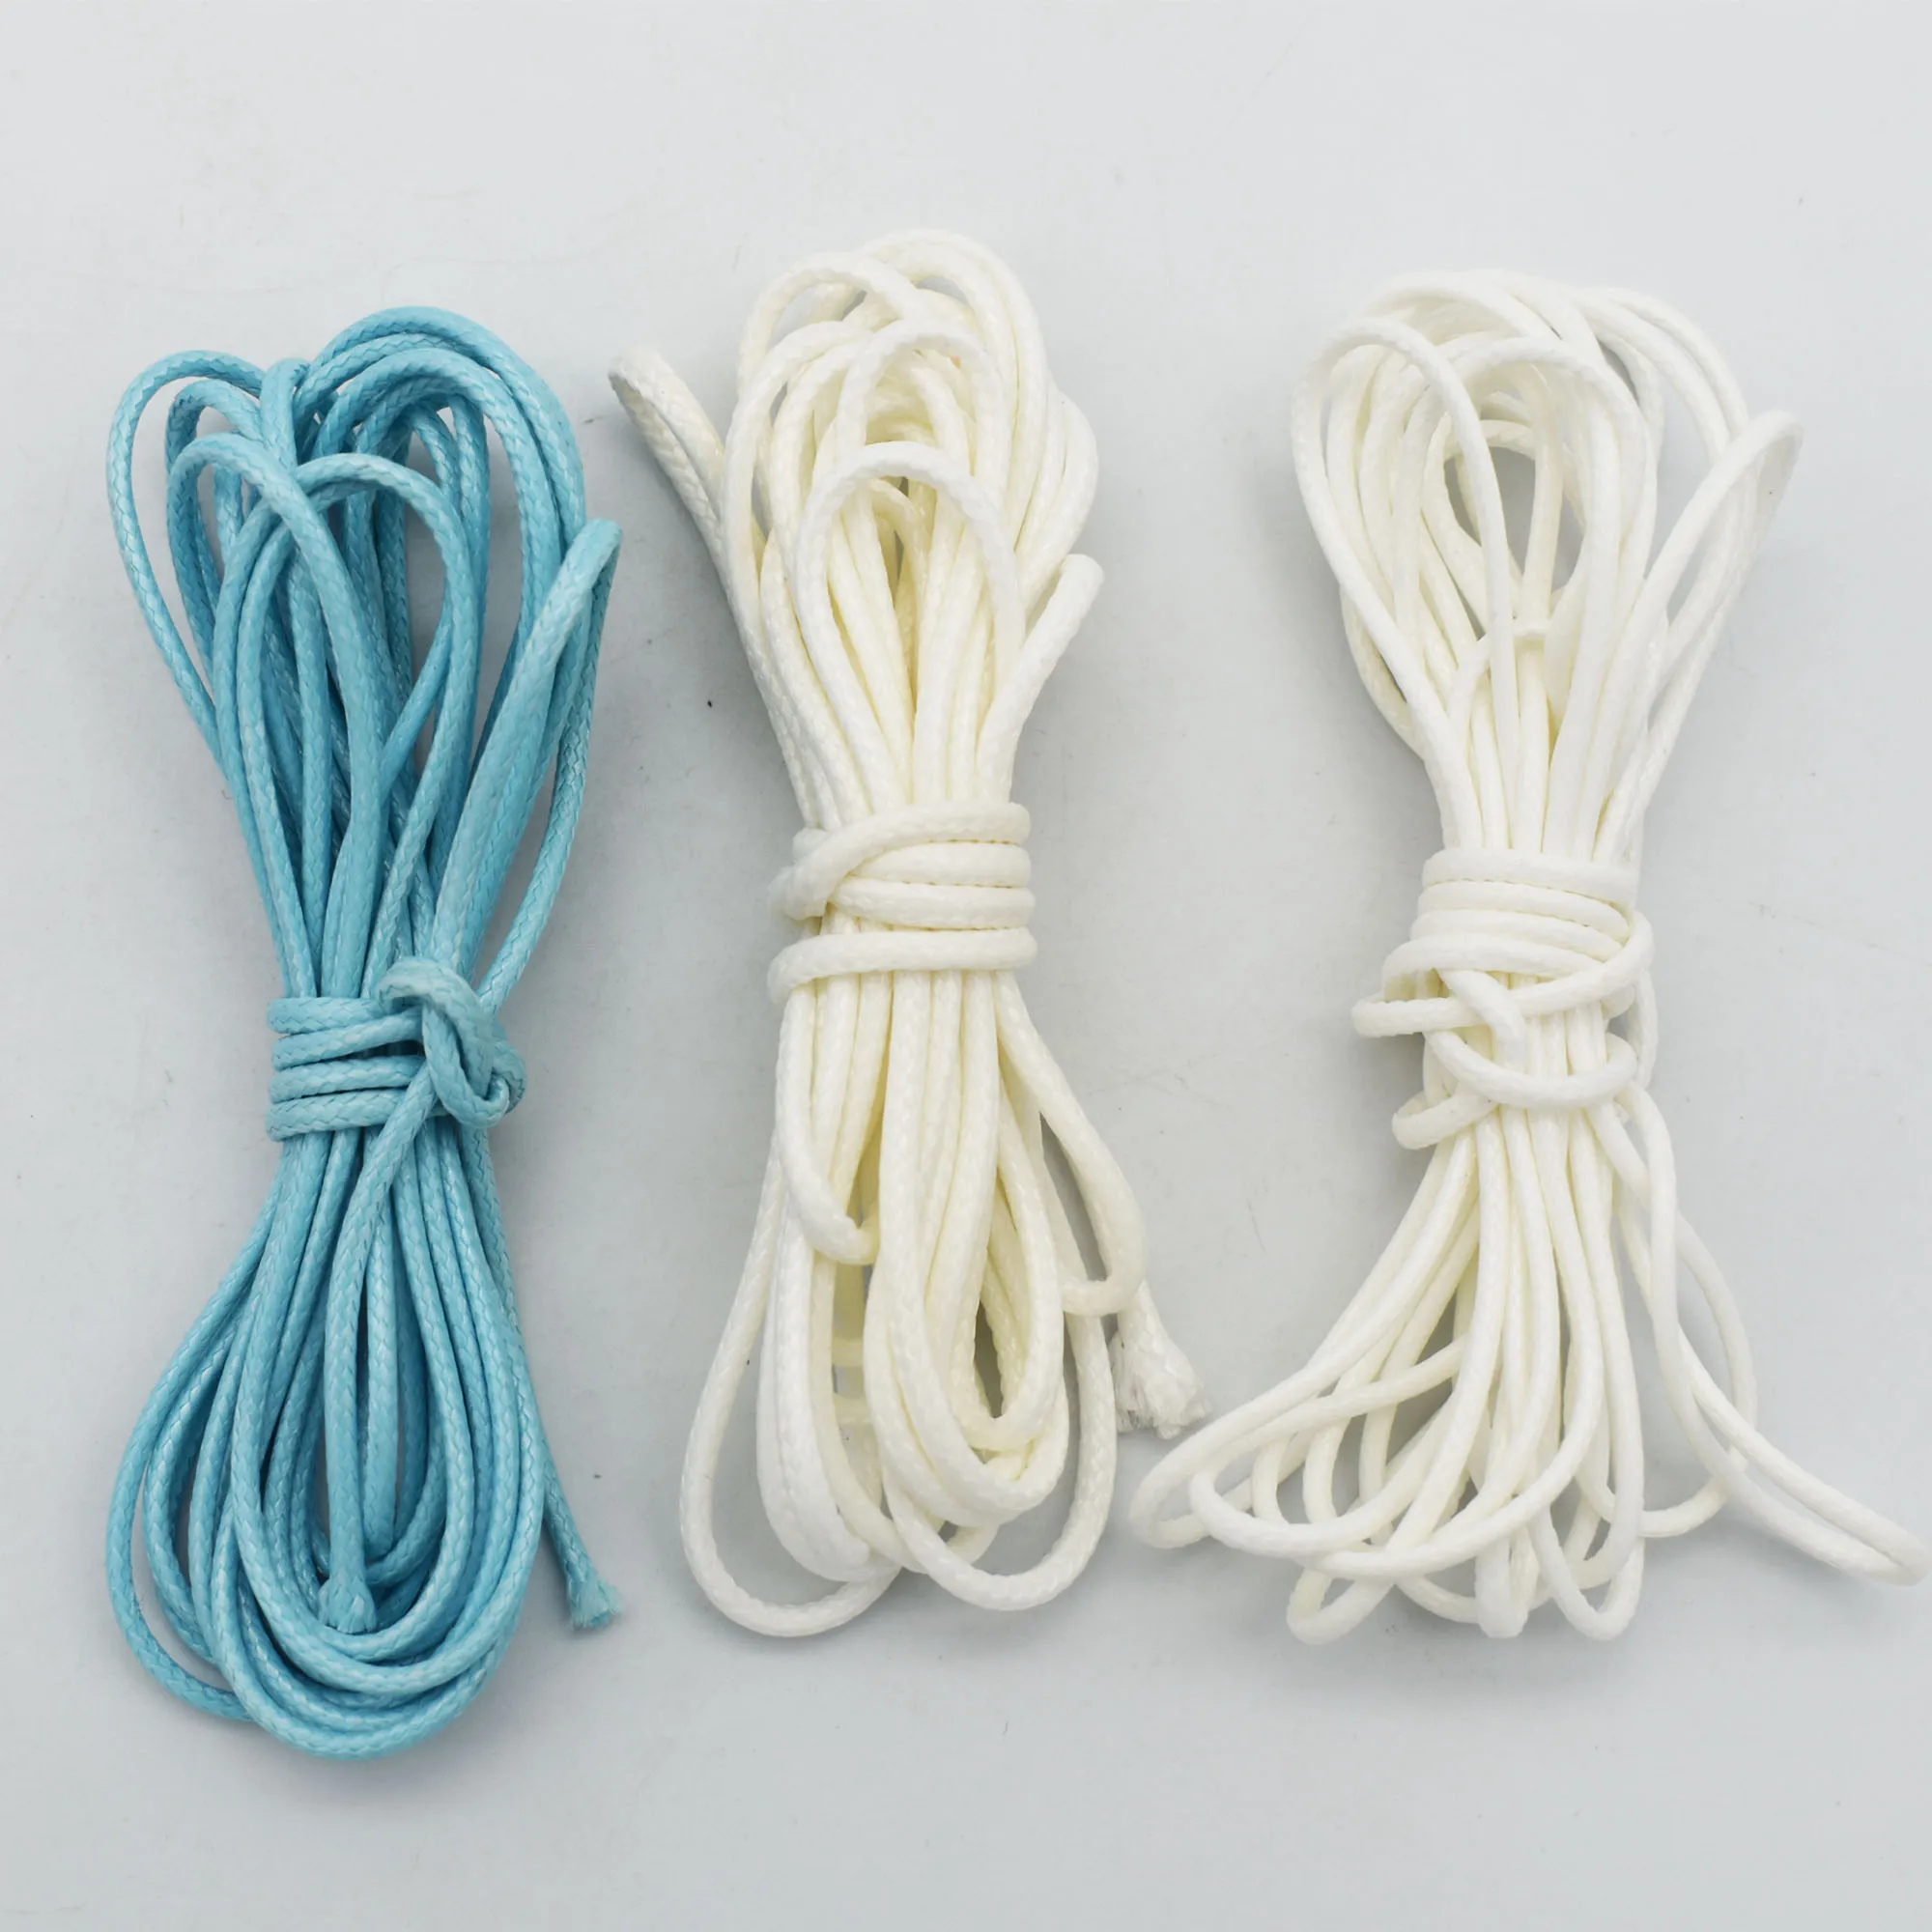 Colors Waxed Polyester Cord Bracelet Cord Wax Coated String for Bracelets  Waxed Thread for Jewelry Making Waxed String for Bracelet Making,white 